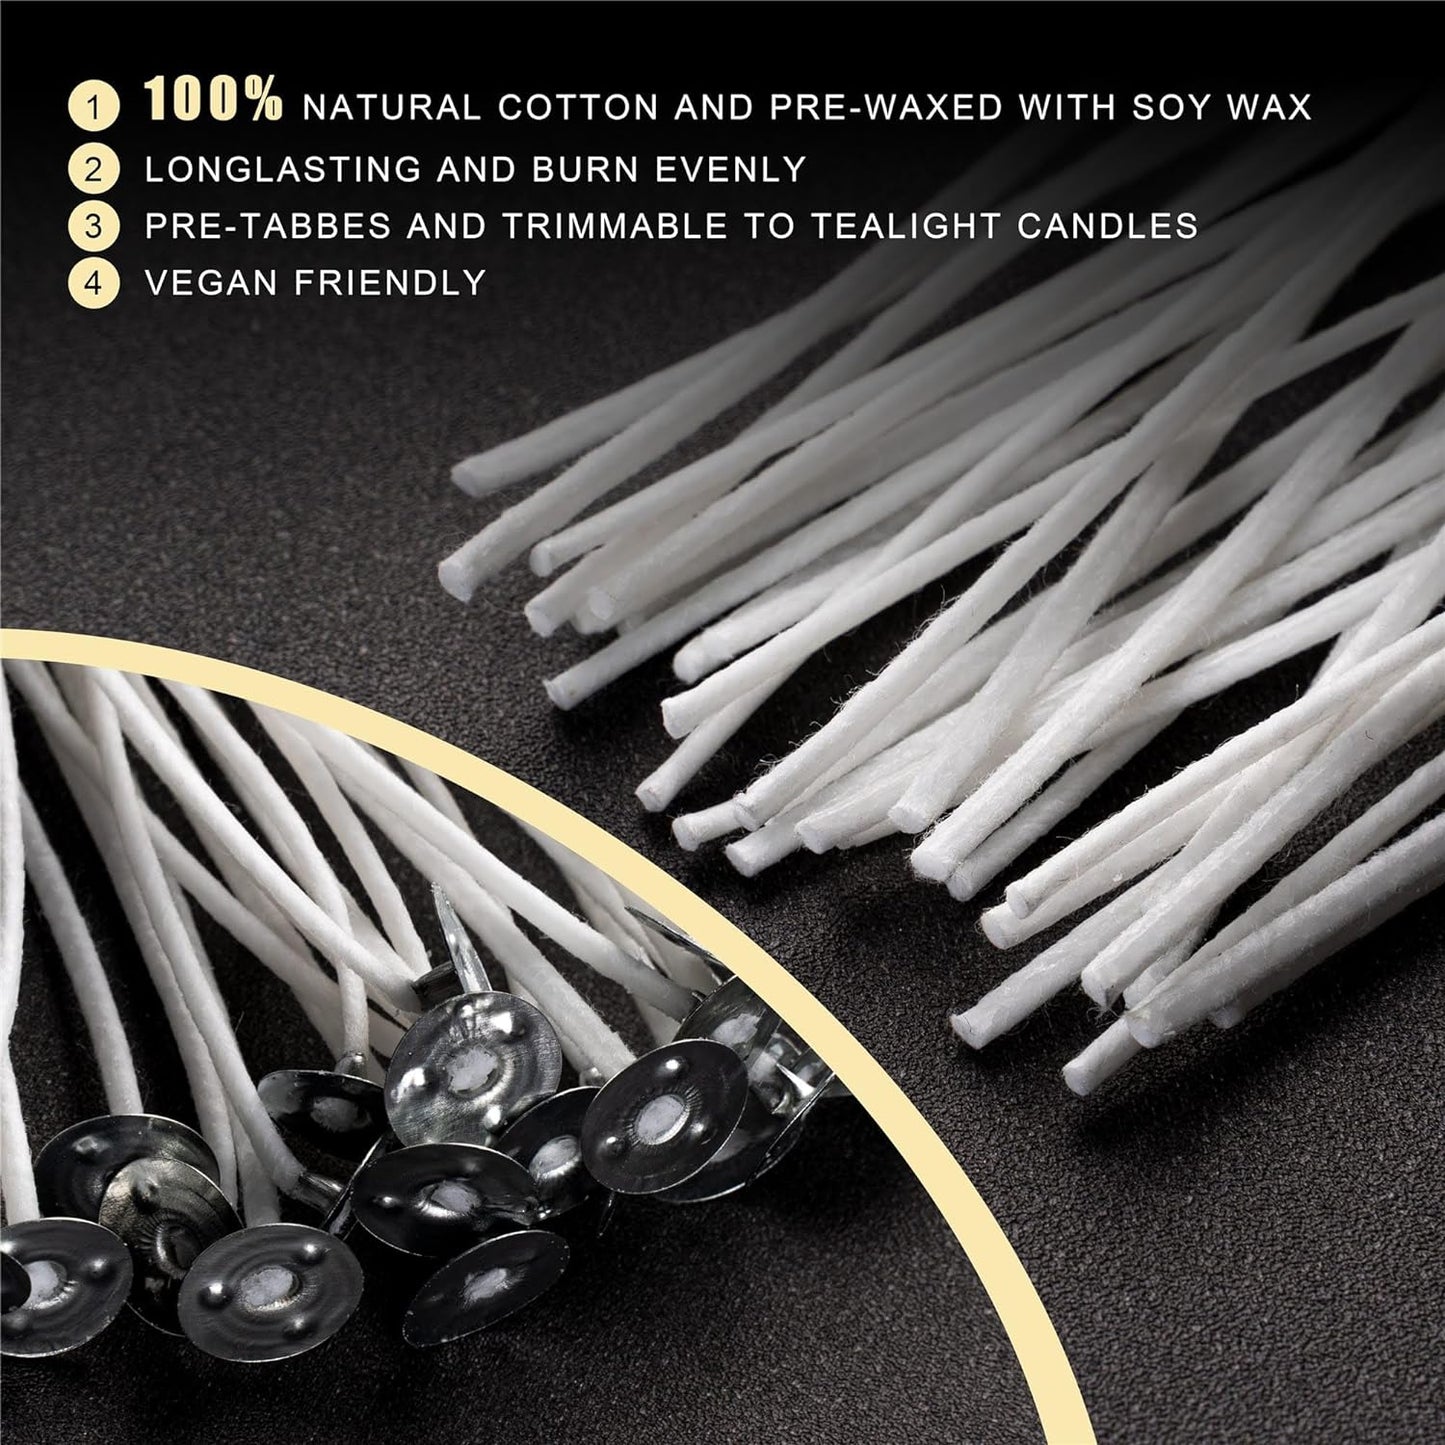 Candle Wicks 90 Pcs (4 Inch, 6 Inch, 8 Inch) with 2 Candle Wick Holders & 90 Wick Tab Stickers, Long Lasting Pre-Waxed & Tabbed Cotton Threads with No Black Smoke for Candle Making